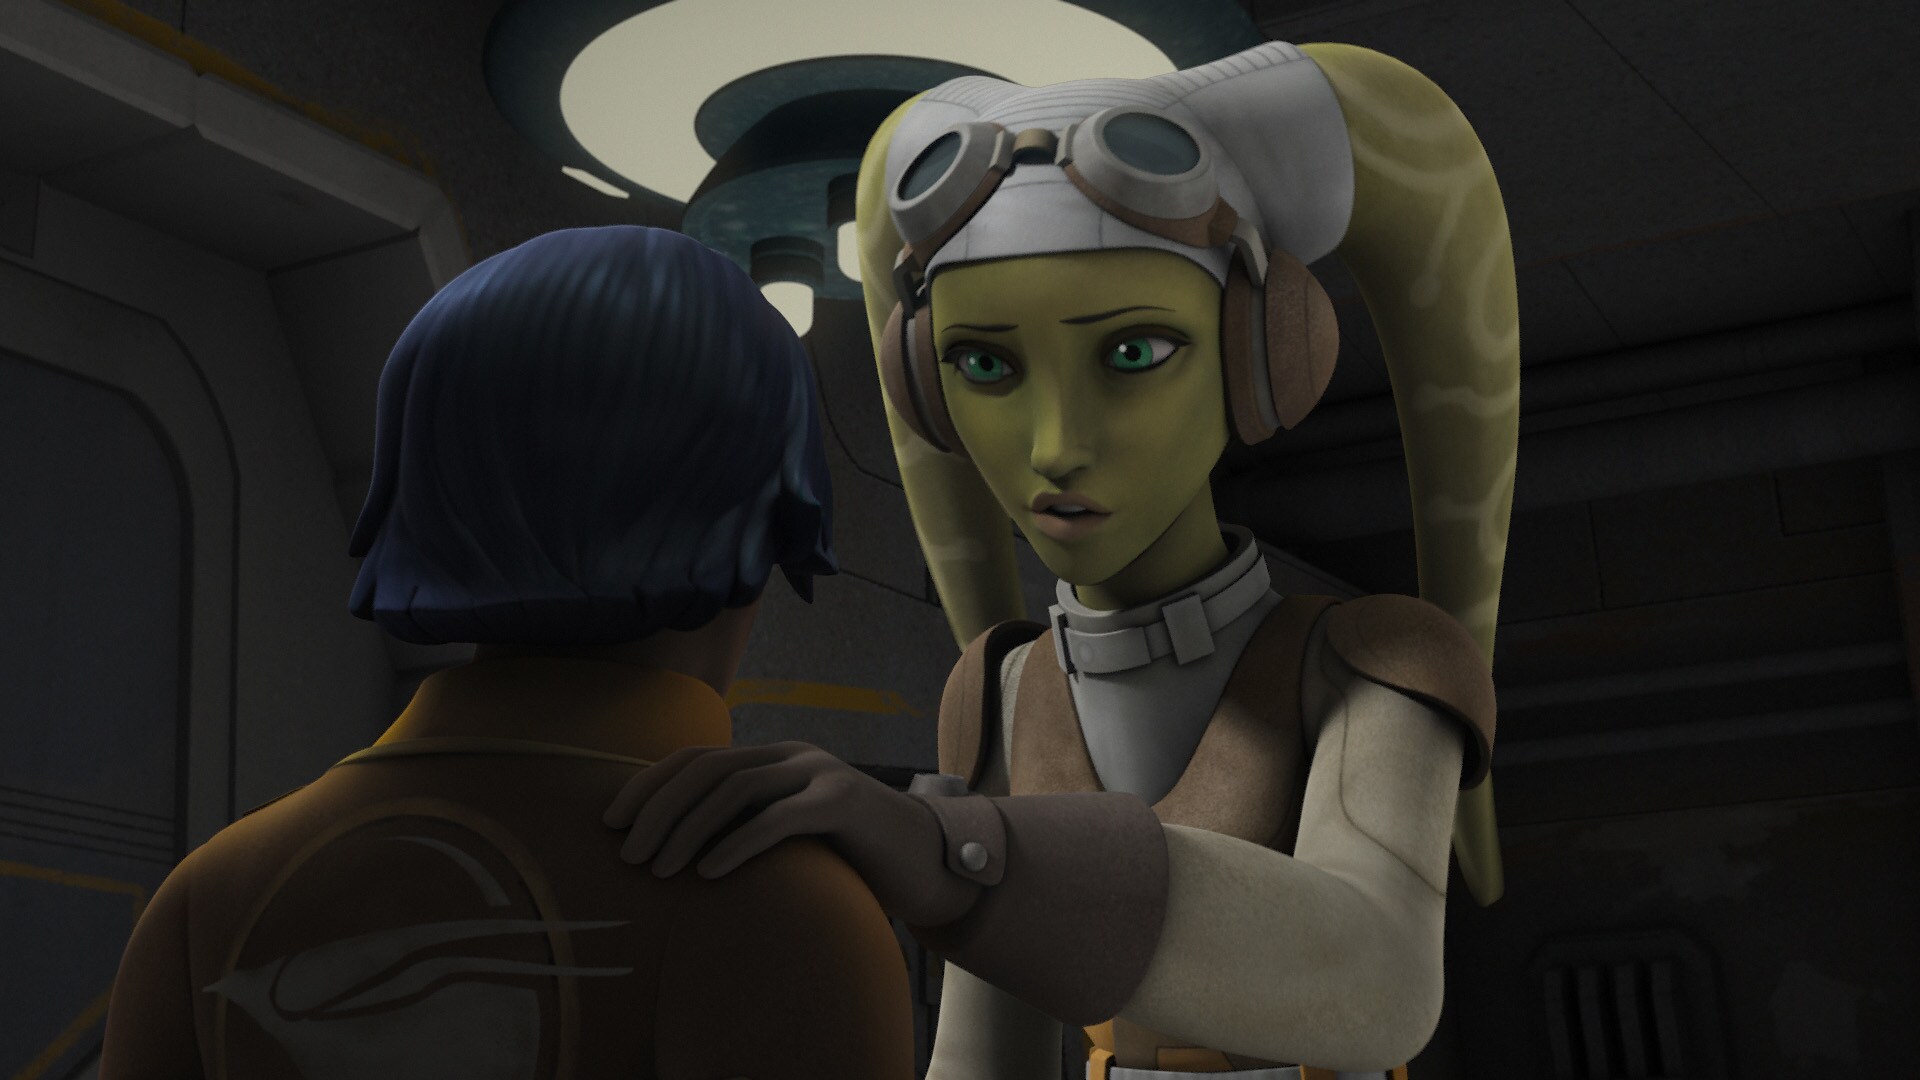 But when recon missions to gather information about Kanan proved fruitless, Hera obeyed Fulcrum’s...